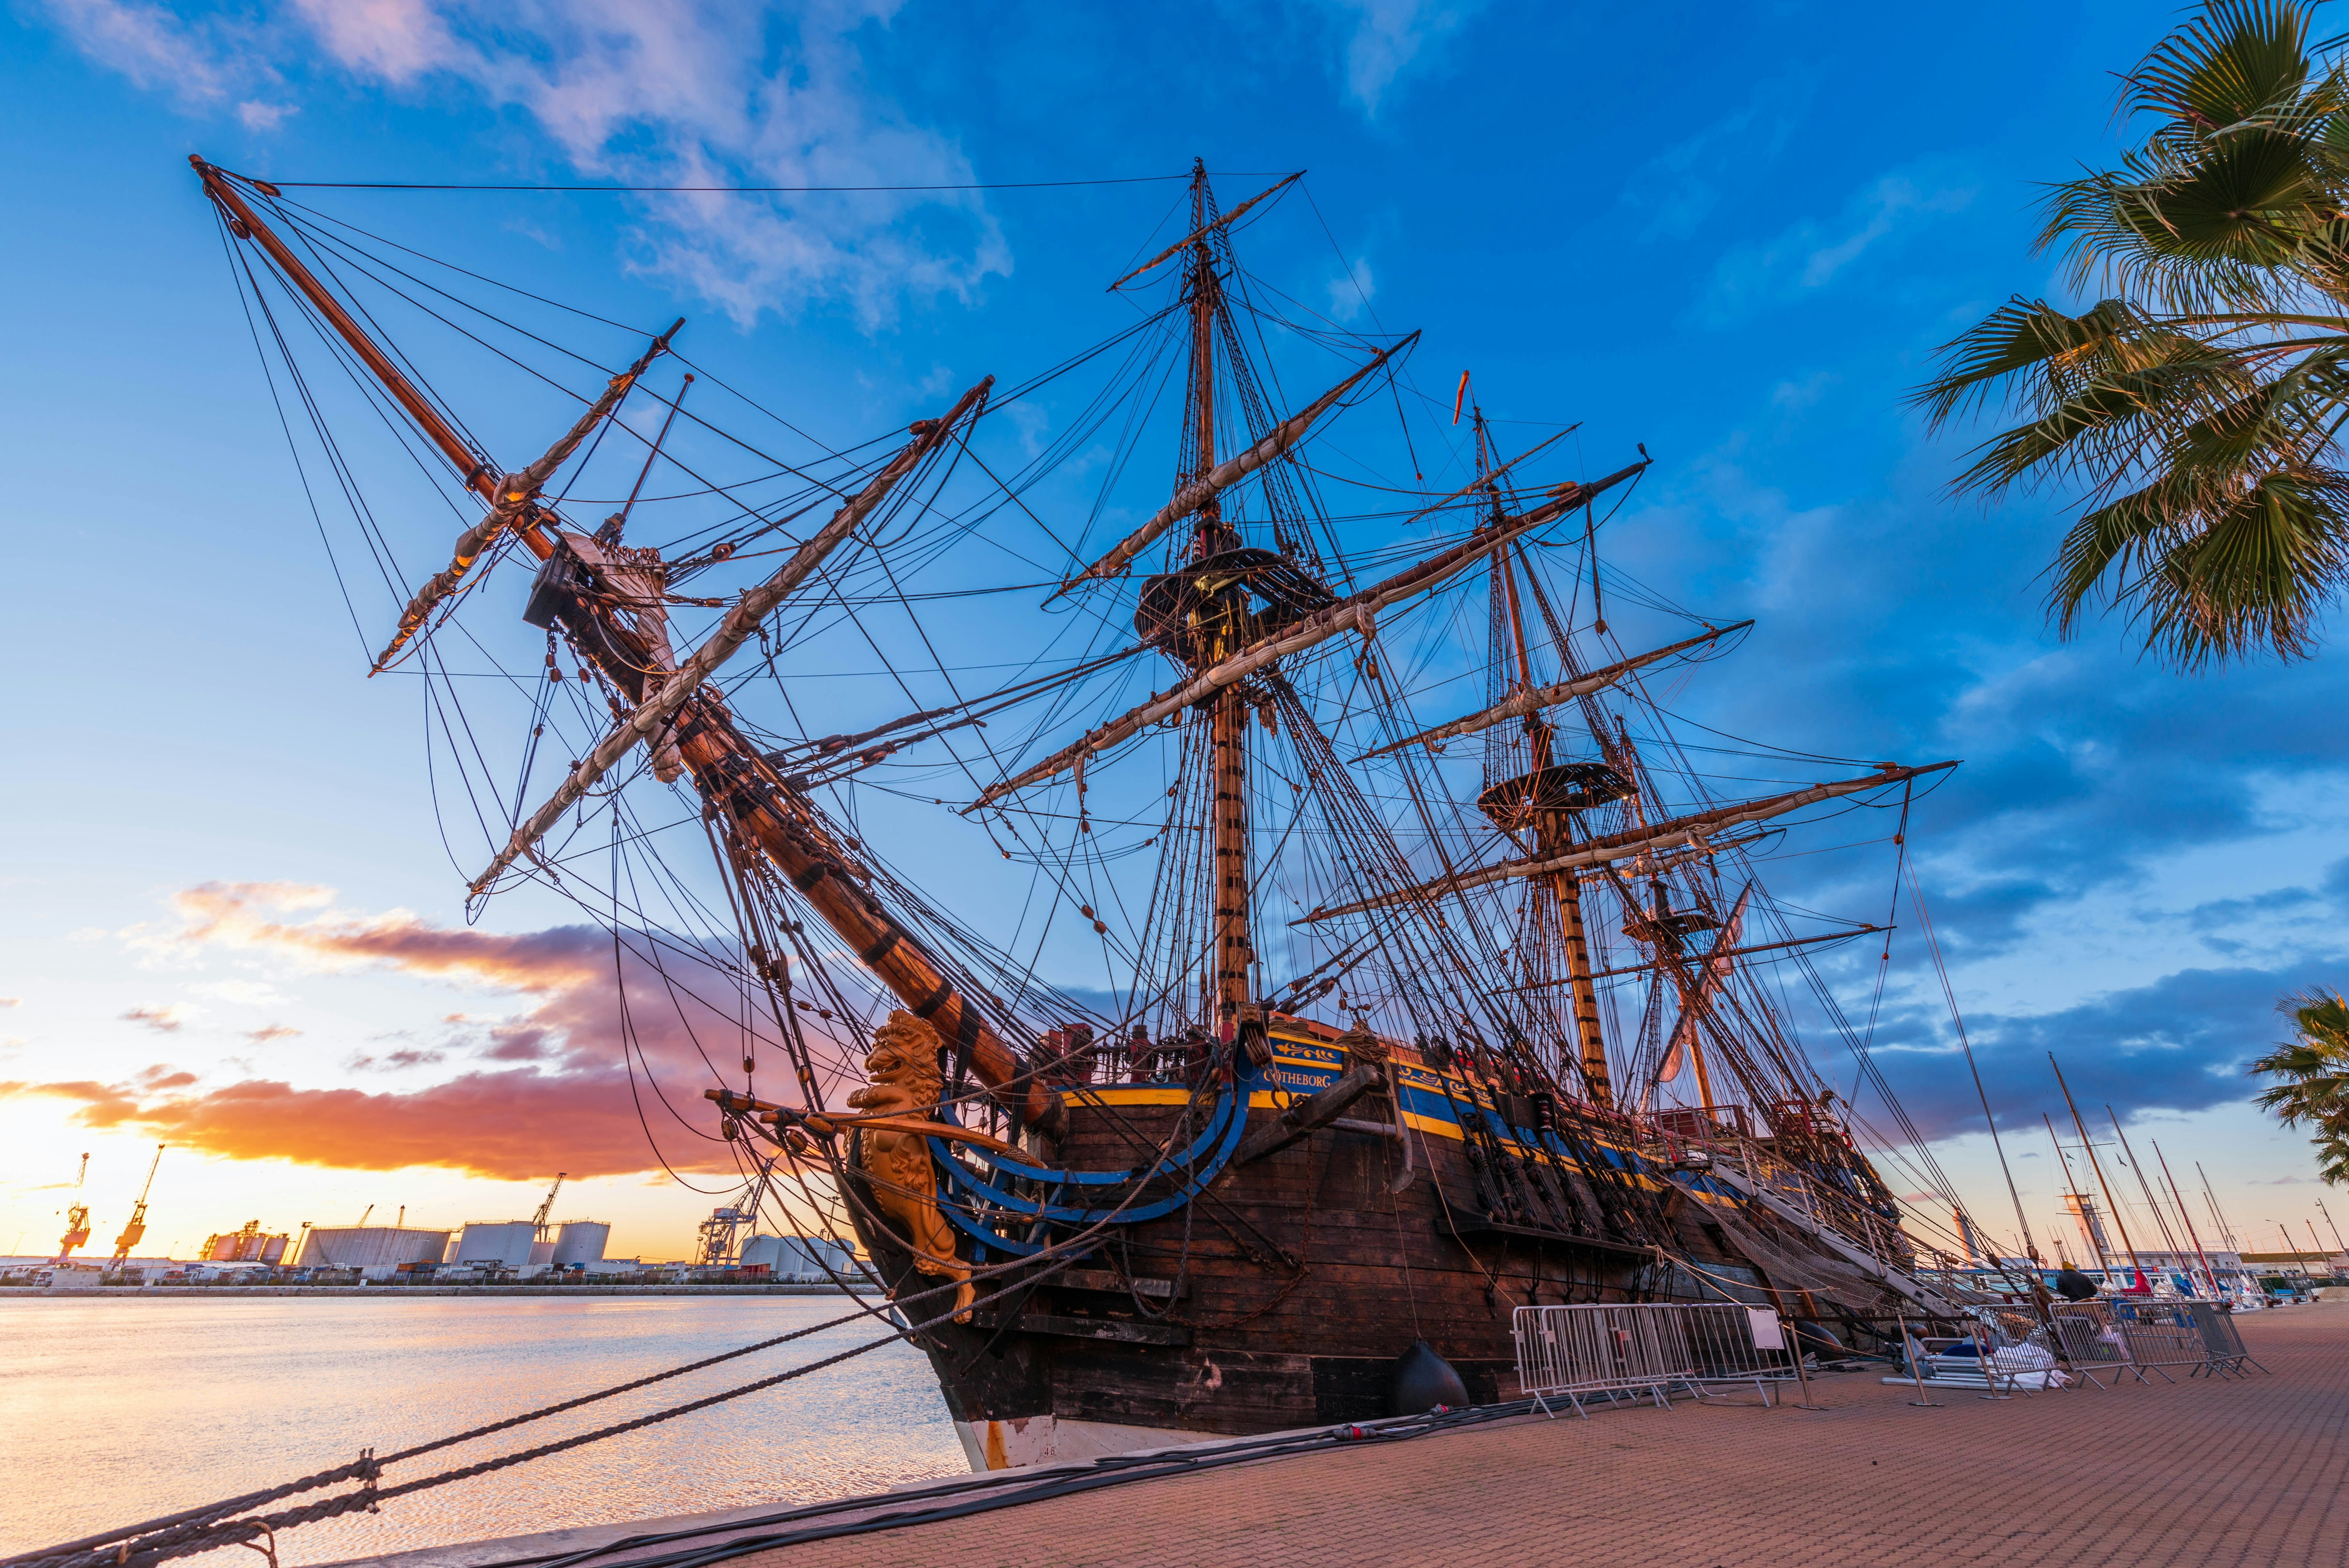 While the original Götheborg, an 18th-century nautical masterpiece, met an untimely end, its modern replica has recently emerged as a saviour on the seas, rescuing a stranded sailing ship.